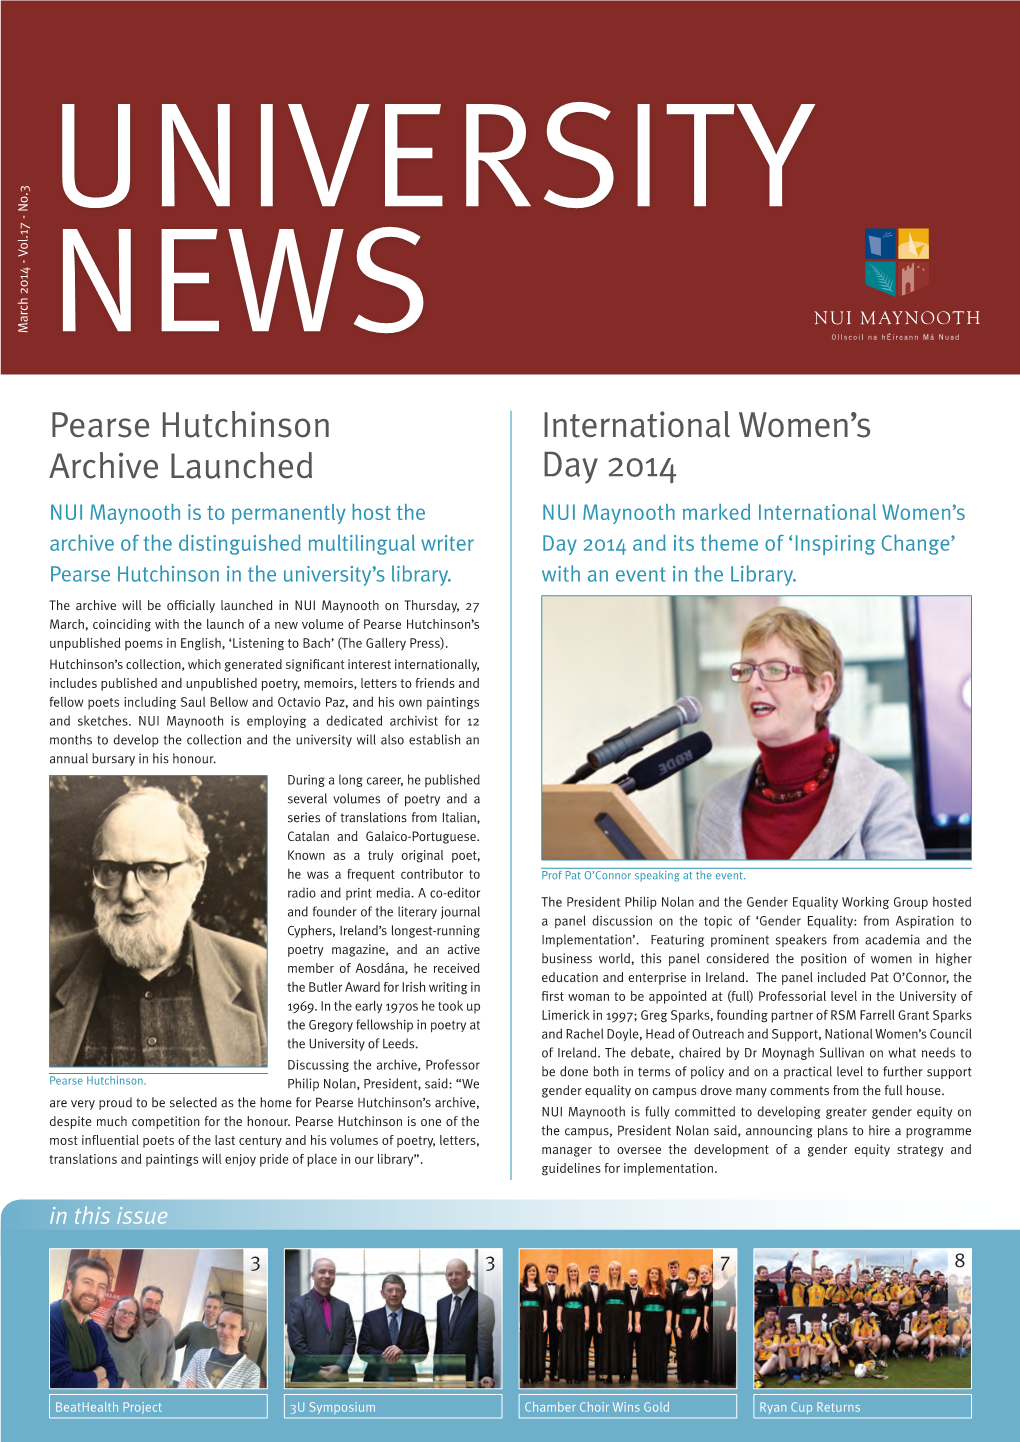 International Women's Day 2014 Pearse Hutchinson Archive Launched